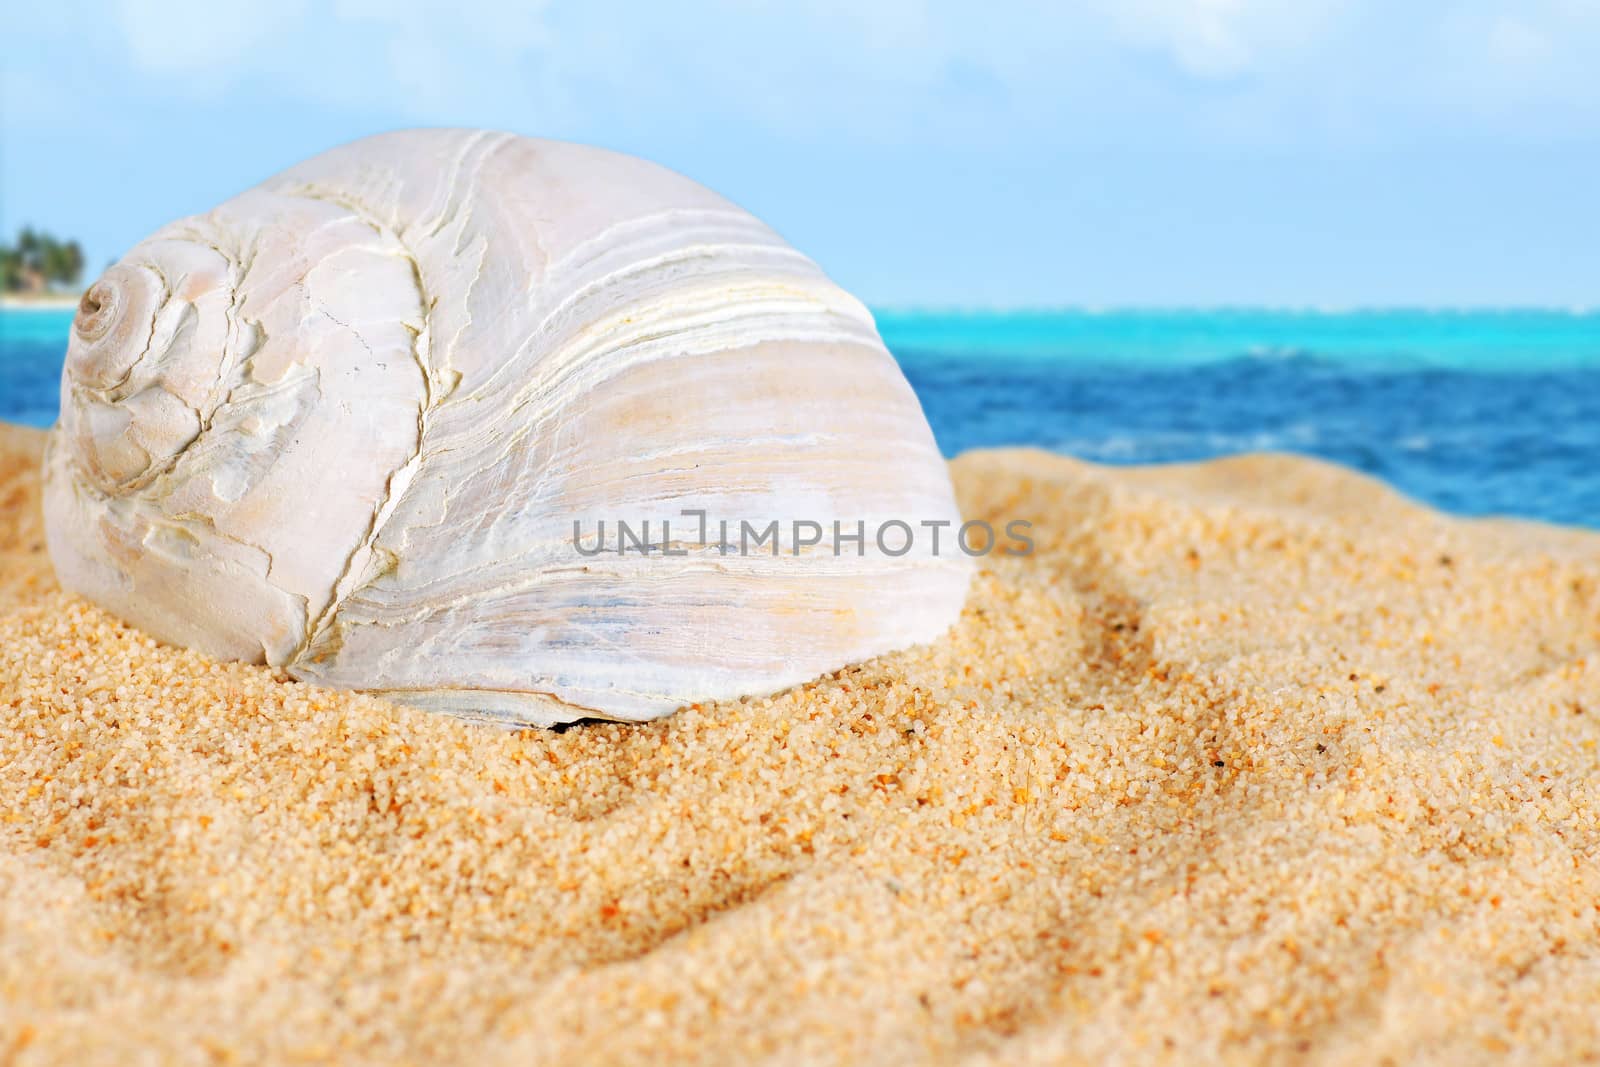 Large shell on beach sand of the Caribbean by Mirage3